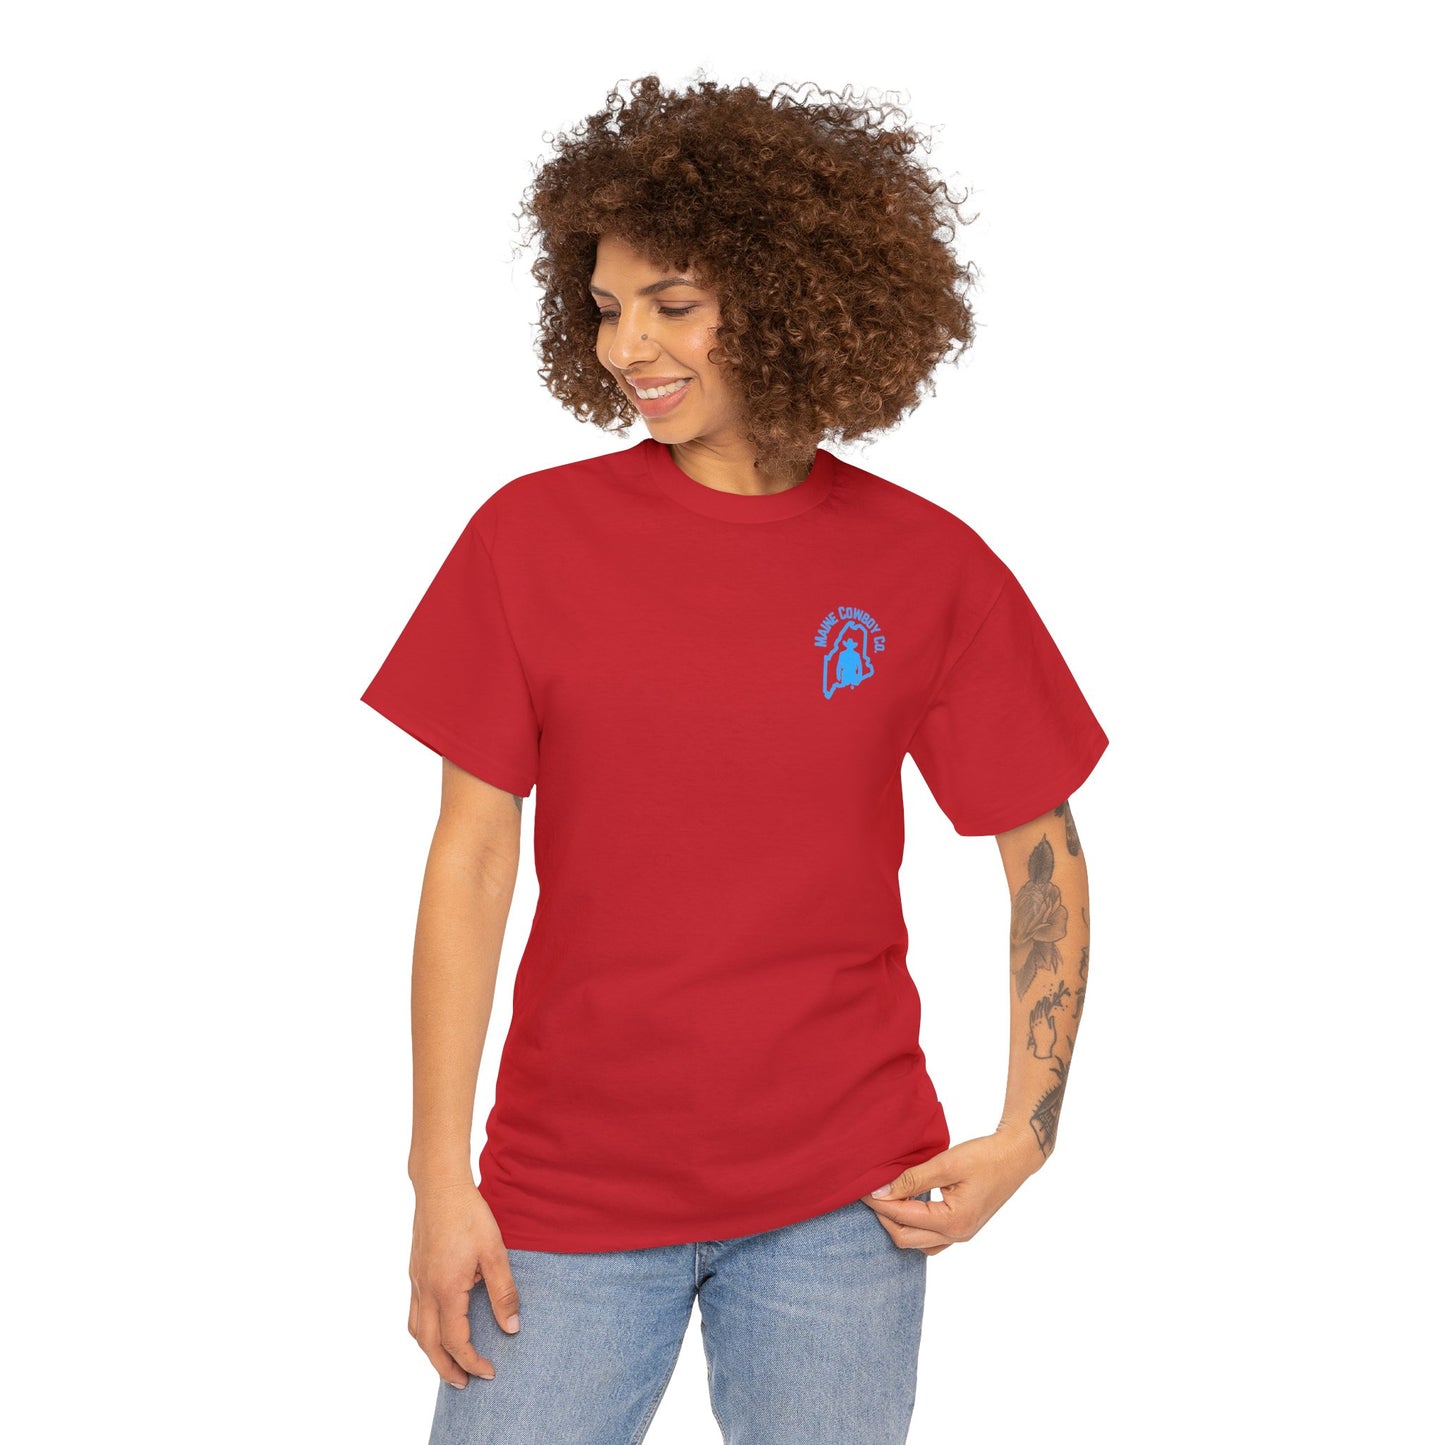 Route 1 Sign Tee